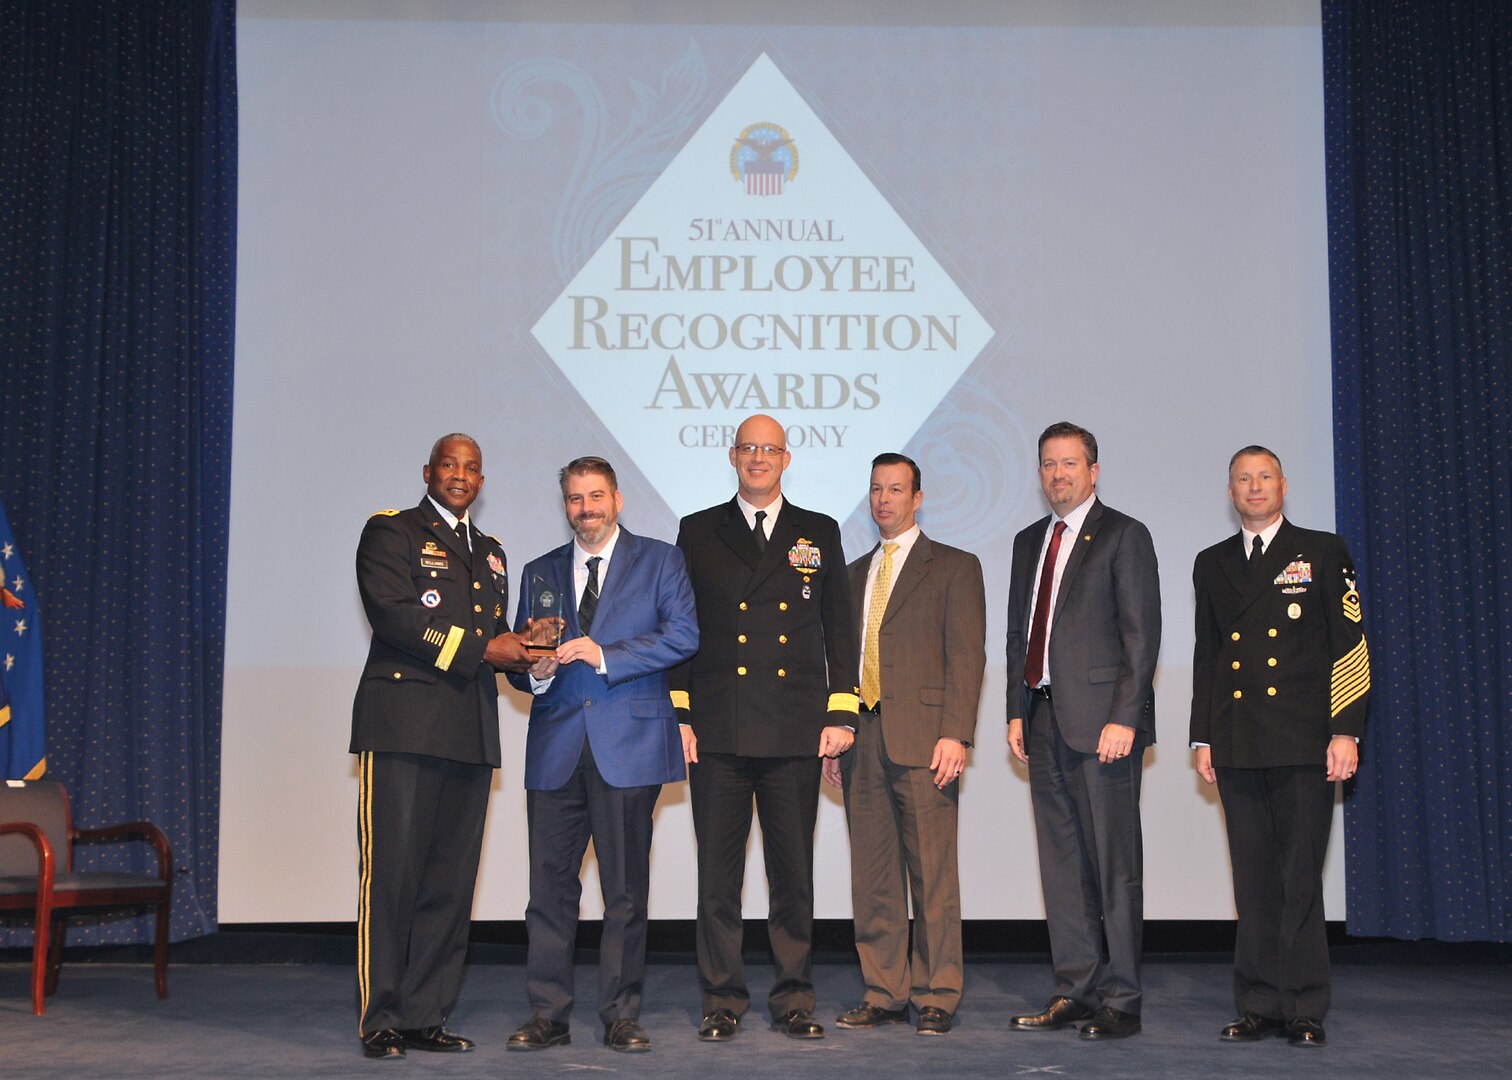 Warner Robins’ Saylor honored at DLA 51st annual employee recognition ceremony